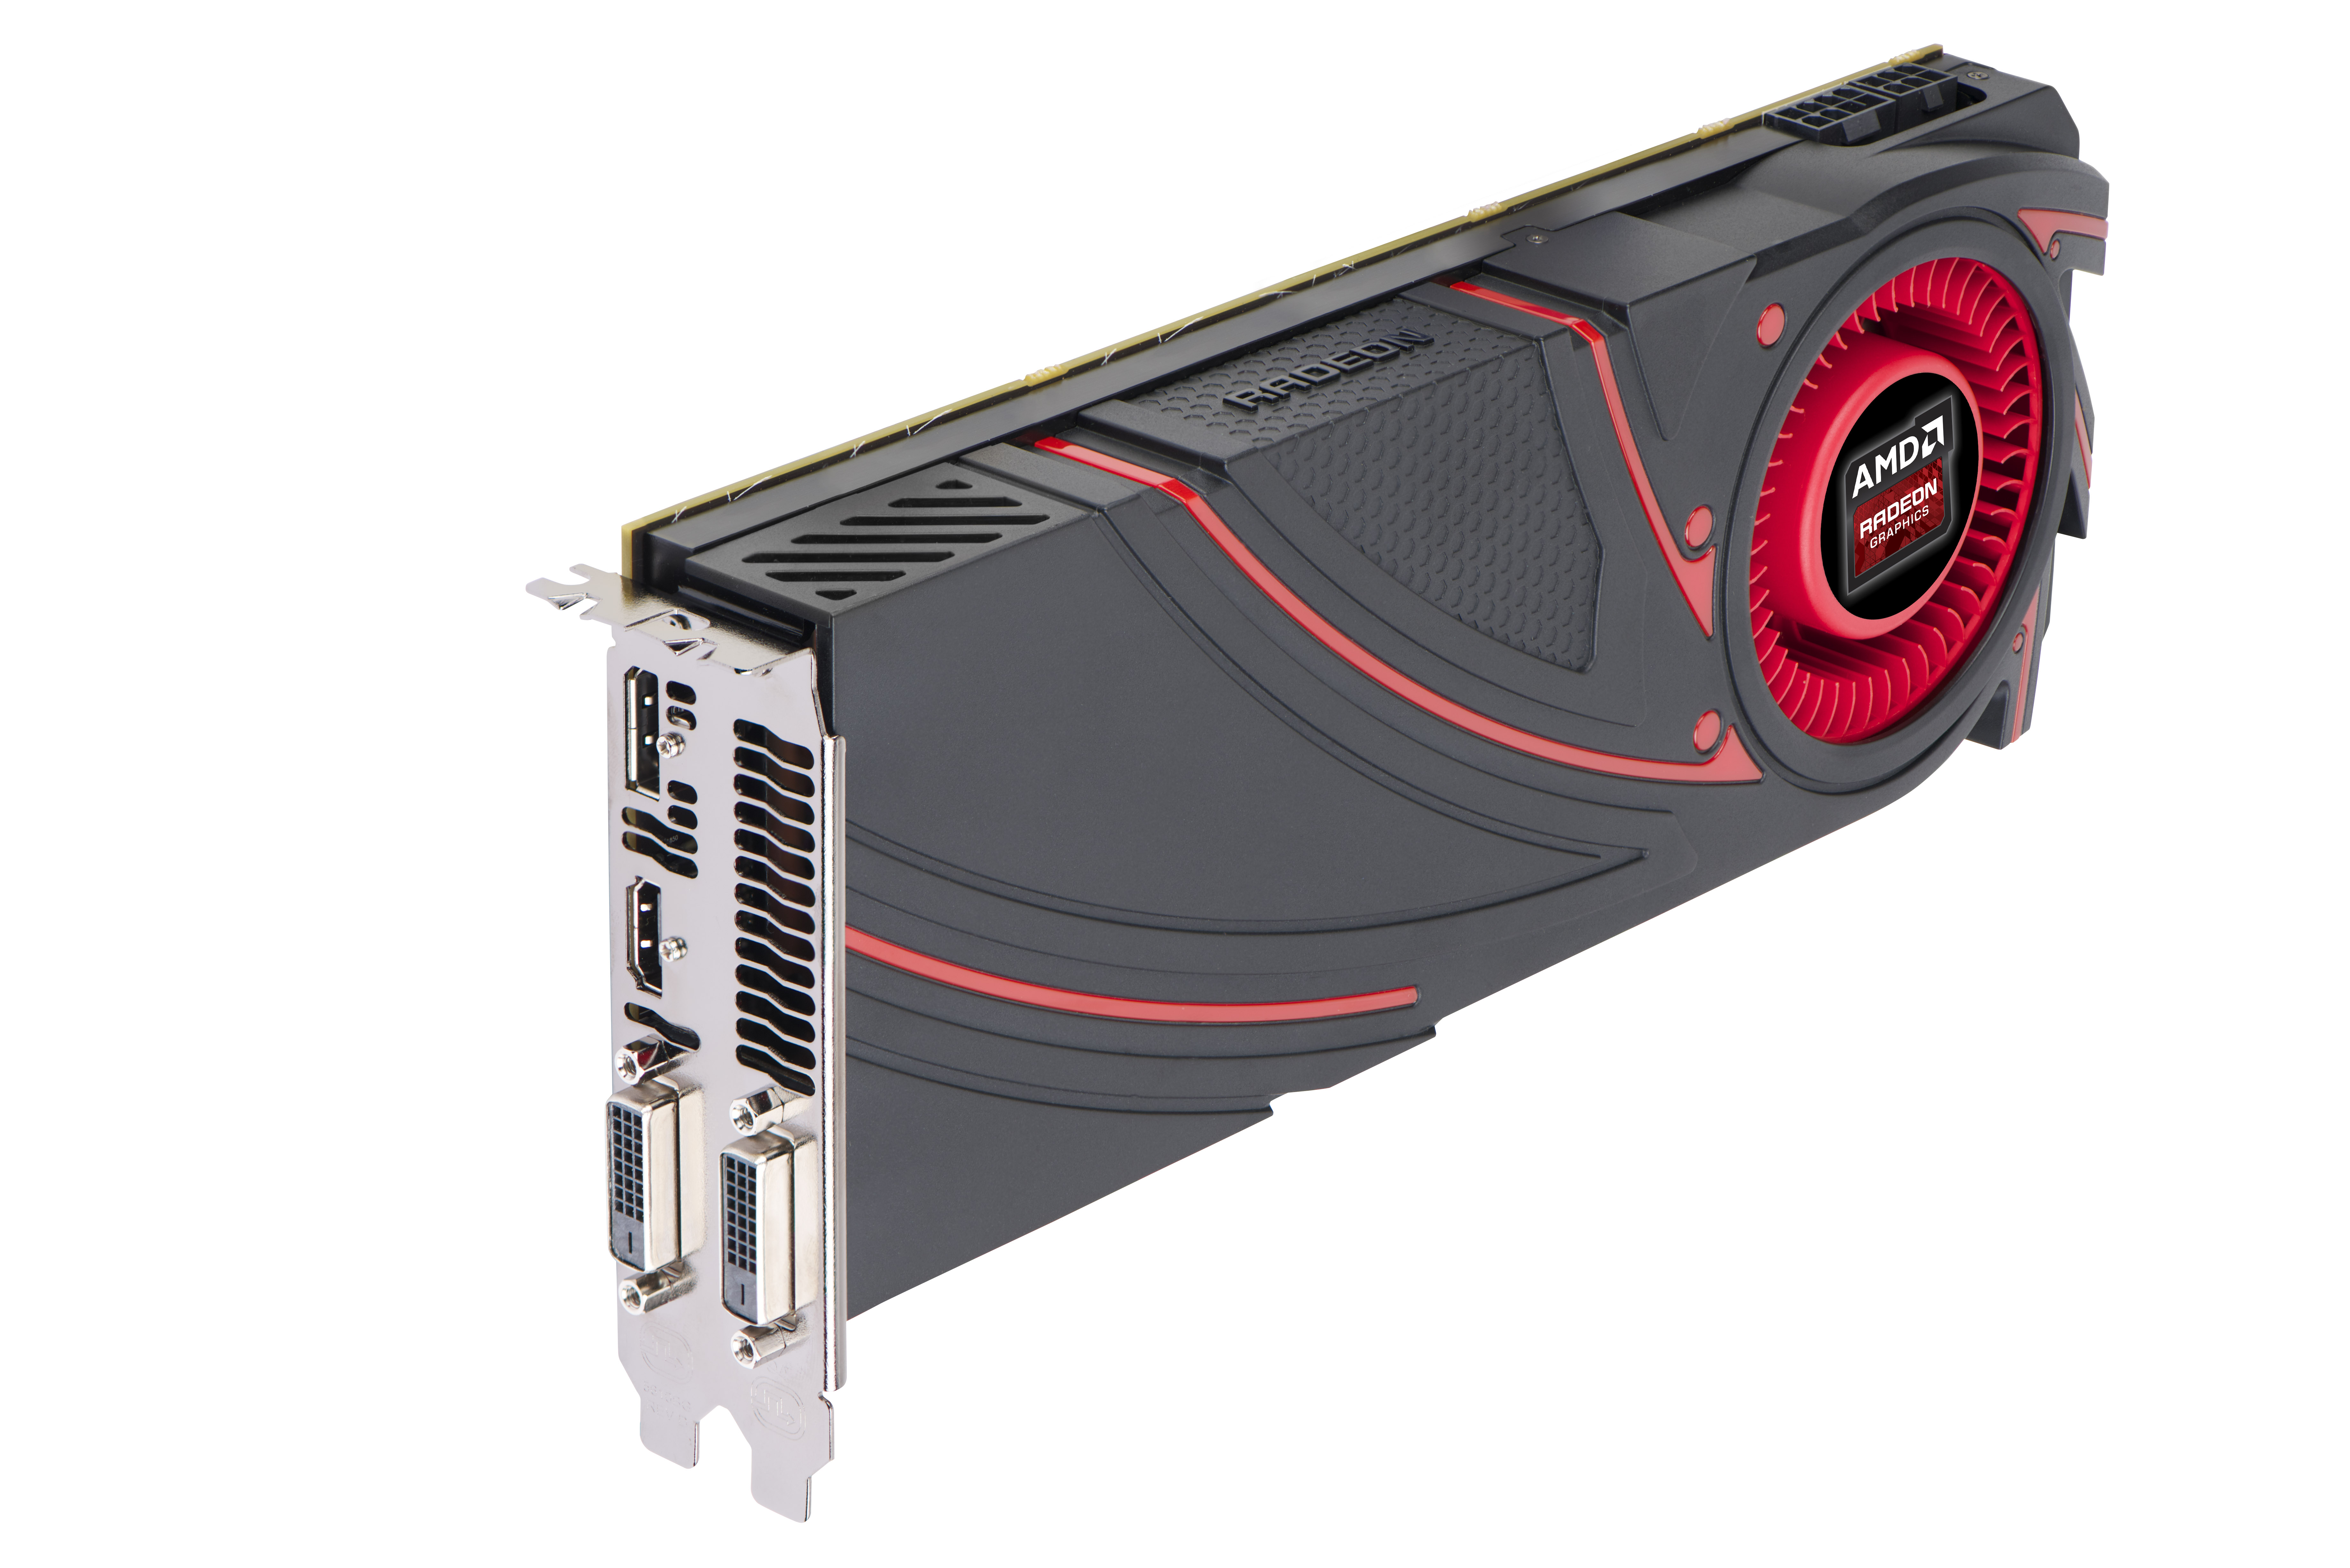 The Amd Radeon R9 290x Review